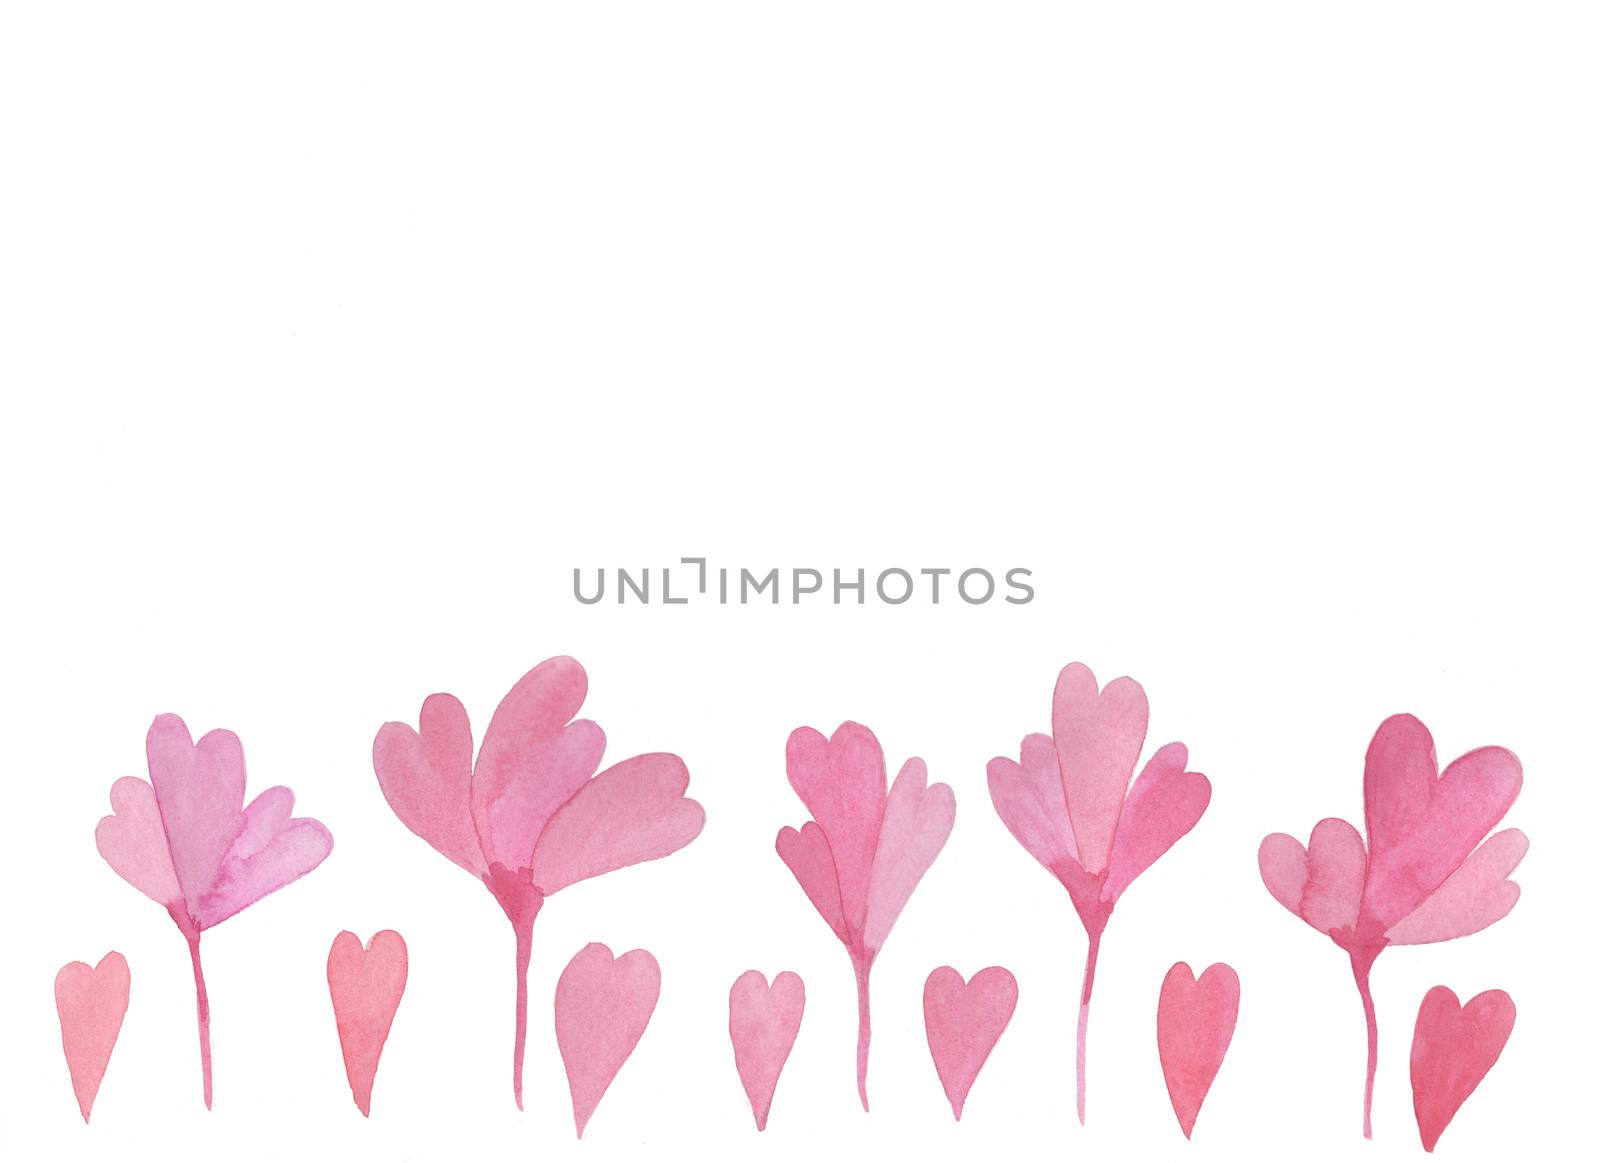 Hand-drawn watercolor flowers and hearts isolated on white background. by galinasharapova